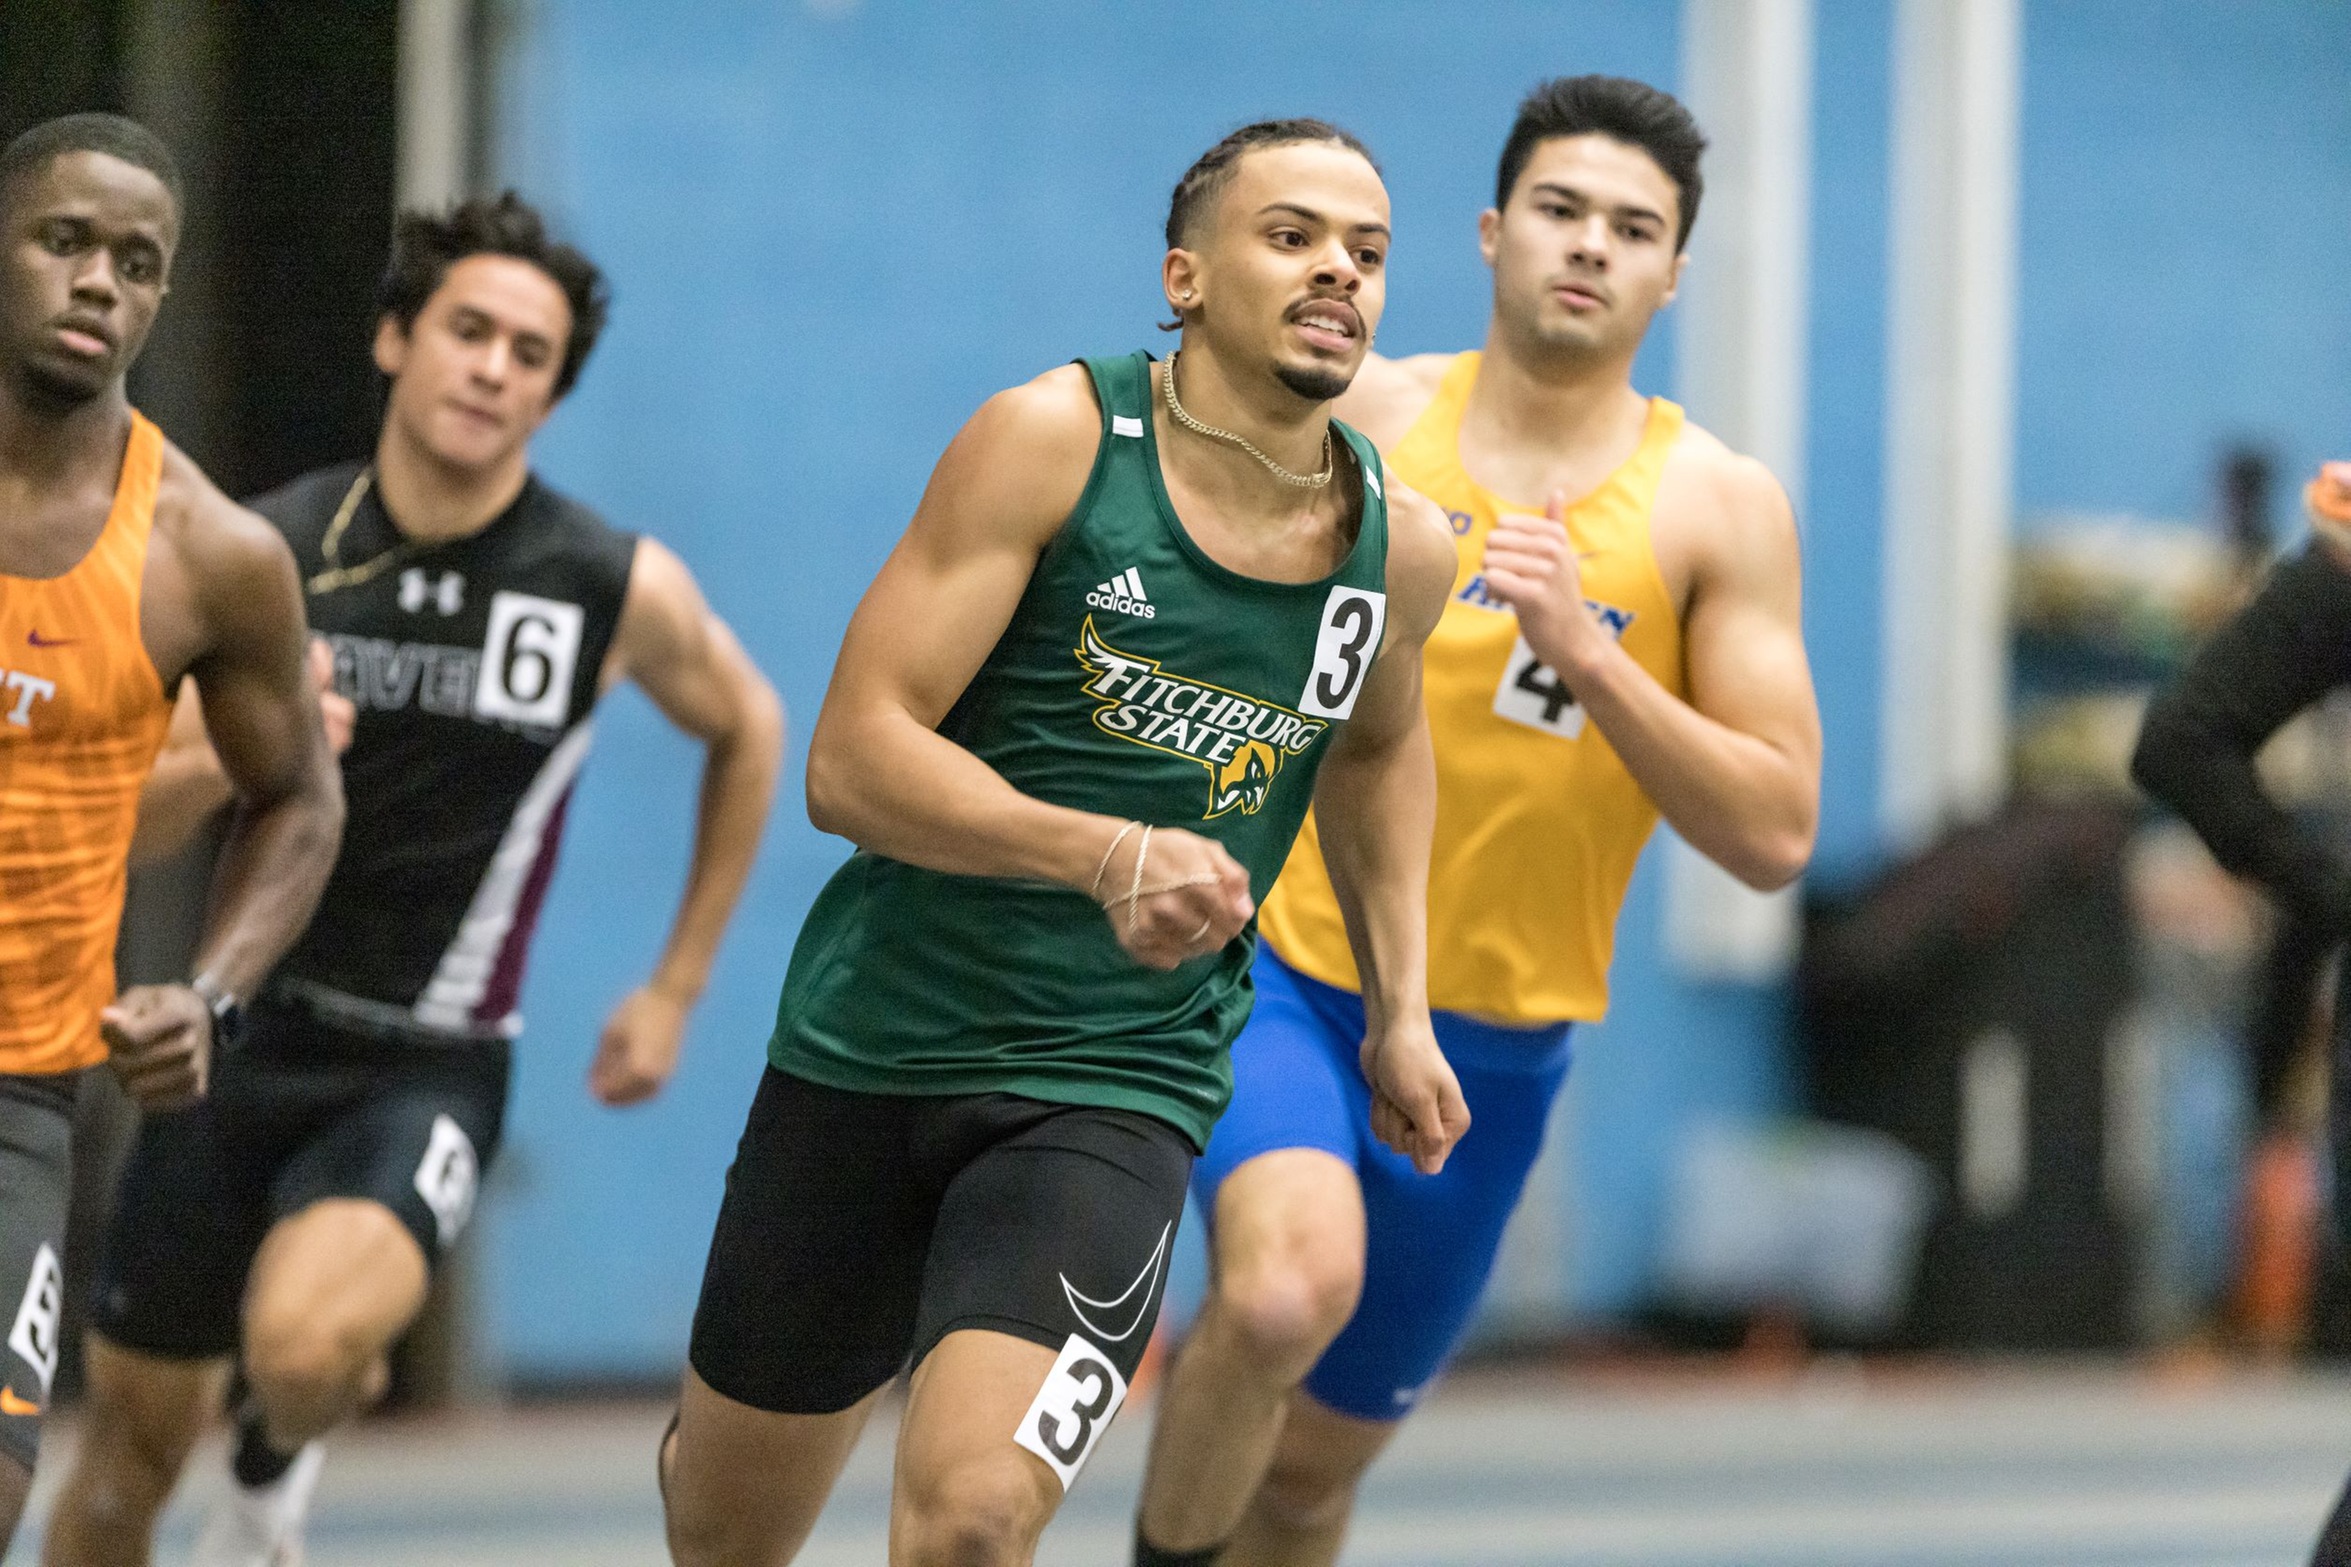 Falcons Compete at DIII New England Championship